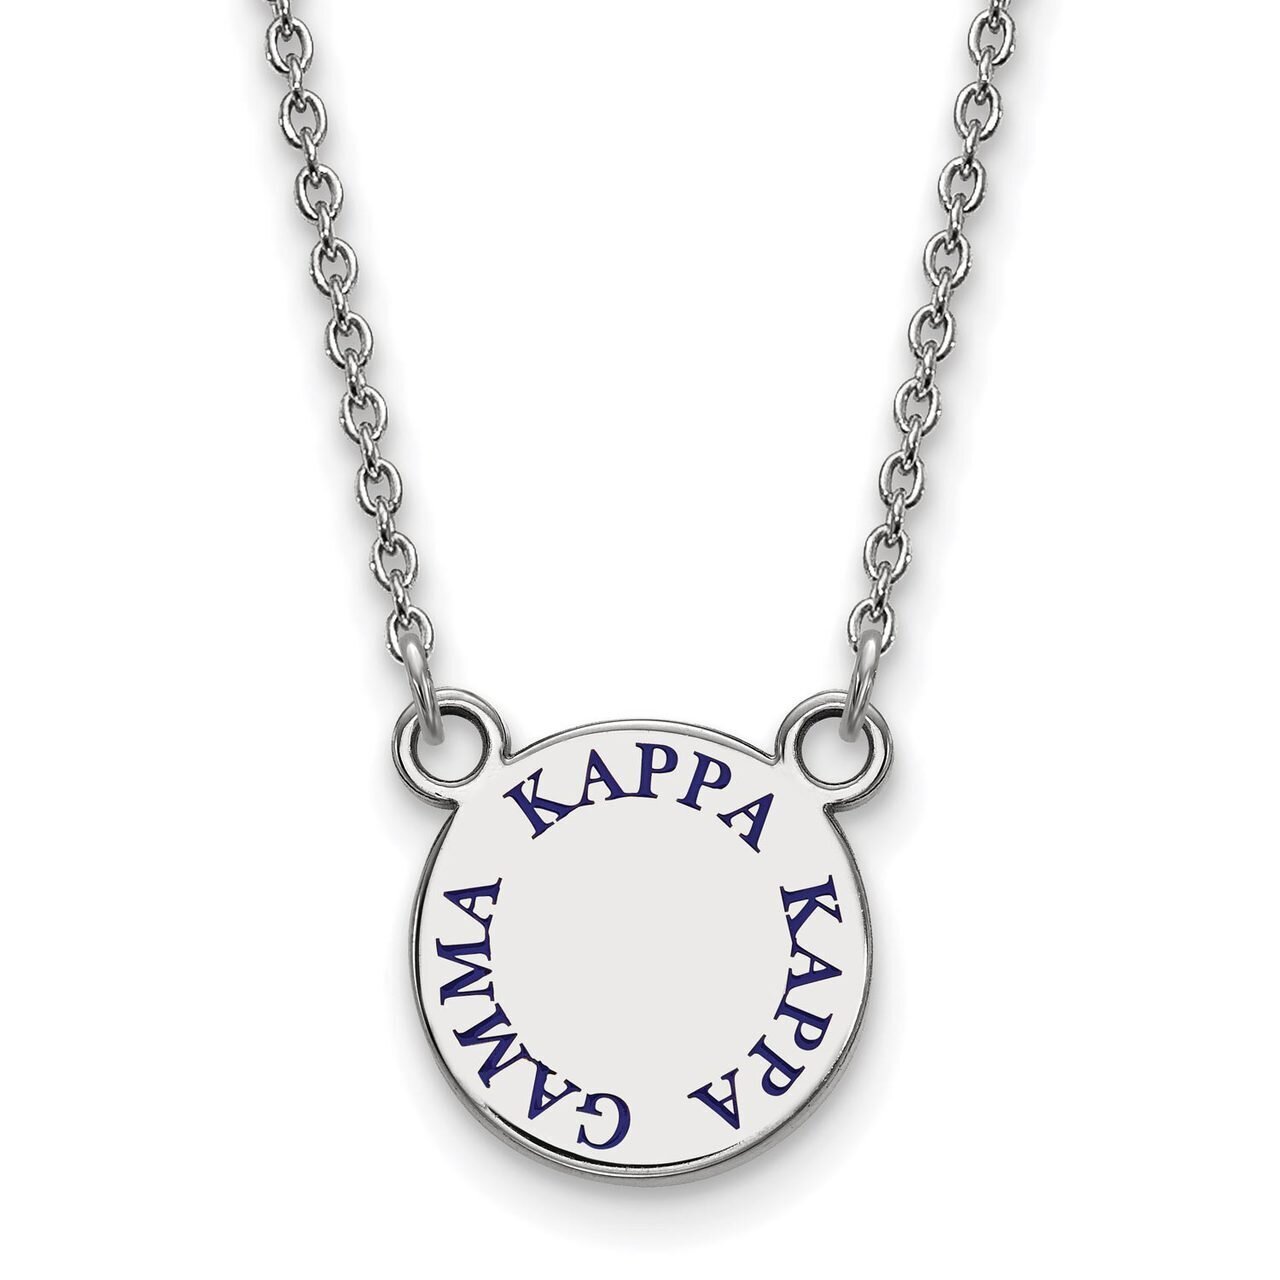 Kappa Kappa Gamma Extra Small Enameled Pendant with 18 Inch Chain Sterling Silver SS014KKG-18